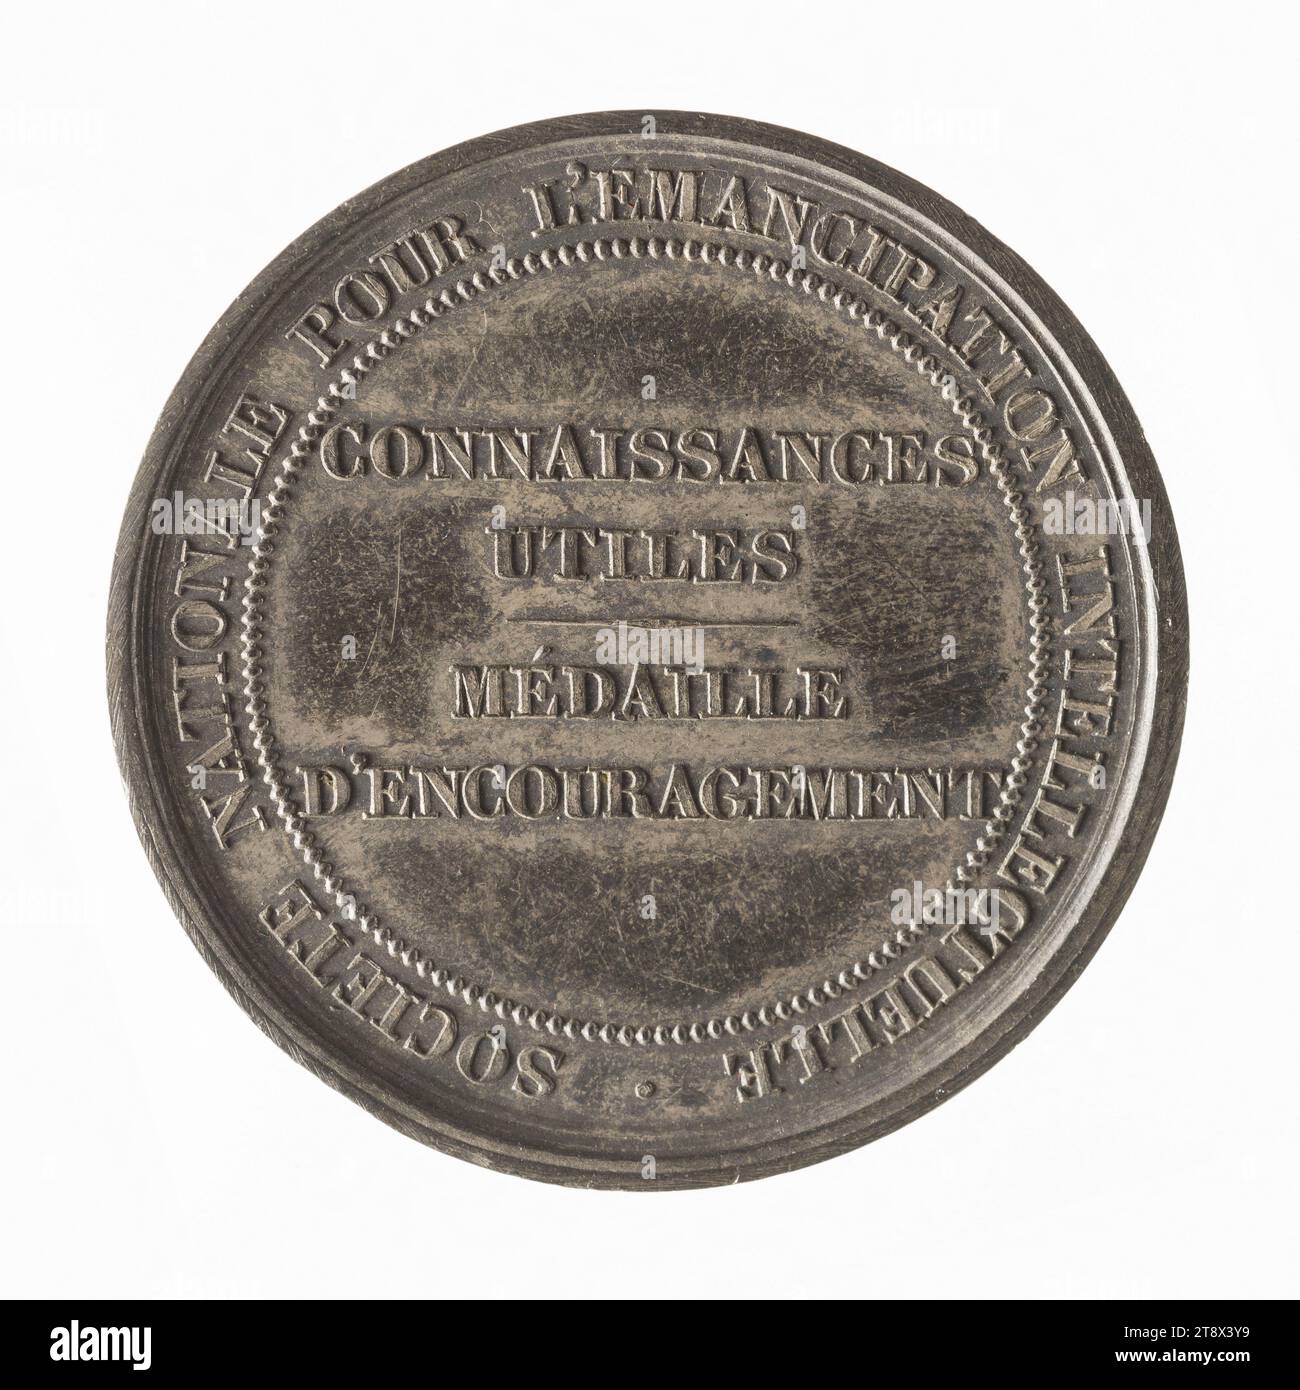 Medal of encouragement from the national society for intellectual emancipation, 19th century, Dubois (painter), Engraver in medals, Puymaurin, Jean-Pierre Casimir de Marcassus de, baron, Author of the model, 19th century, Numismatics, Medal, Silver, Dimensions - Work: Diameter: 3.4 cm, Weight (type dimension): 15.59 g Stock Photo